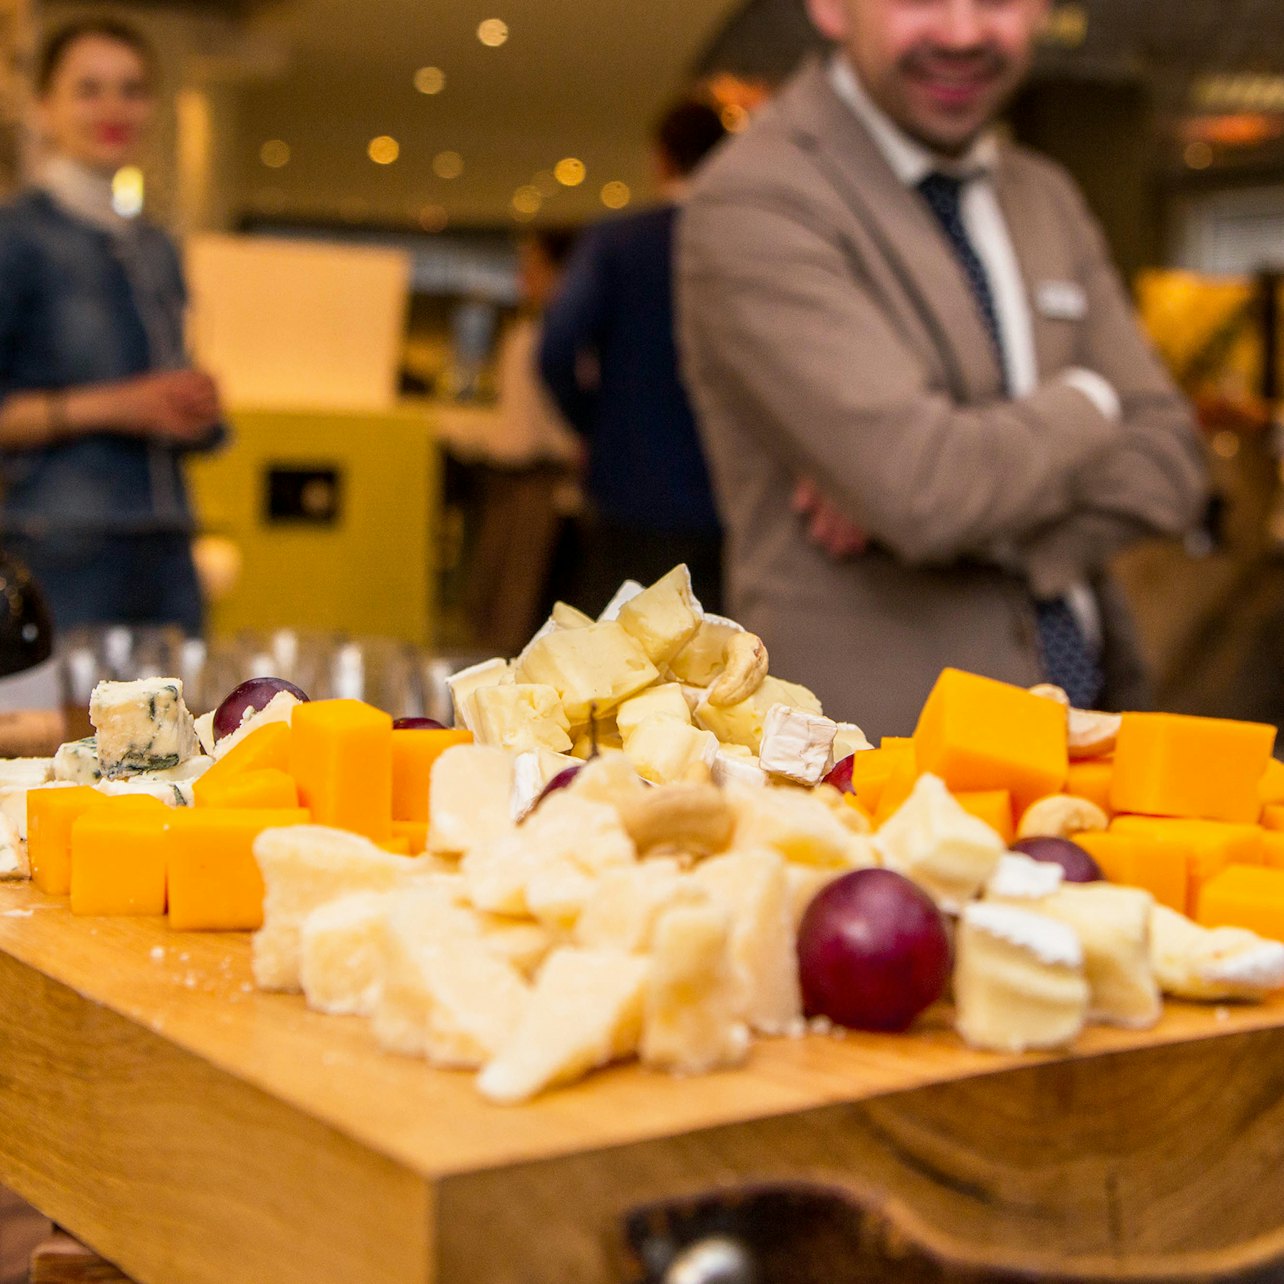 Bordeaux: Wine and Cheese Tasting in an Authentic Wine Cellar - Accommodations in Bordeaux